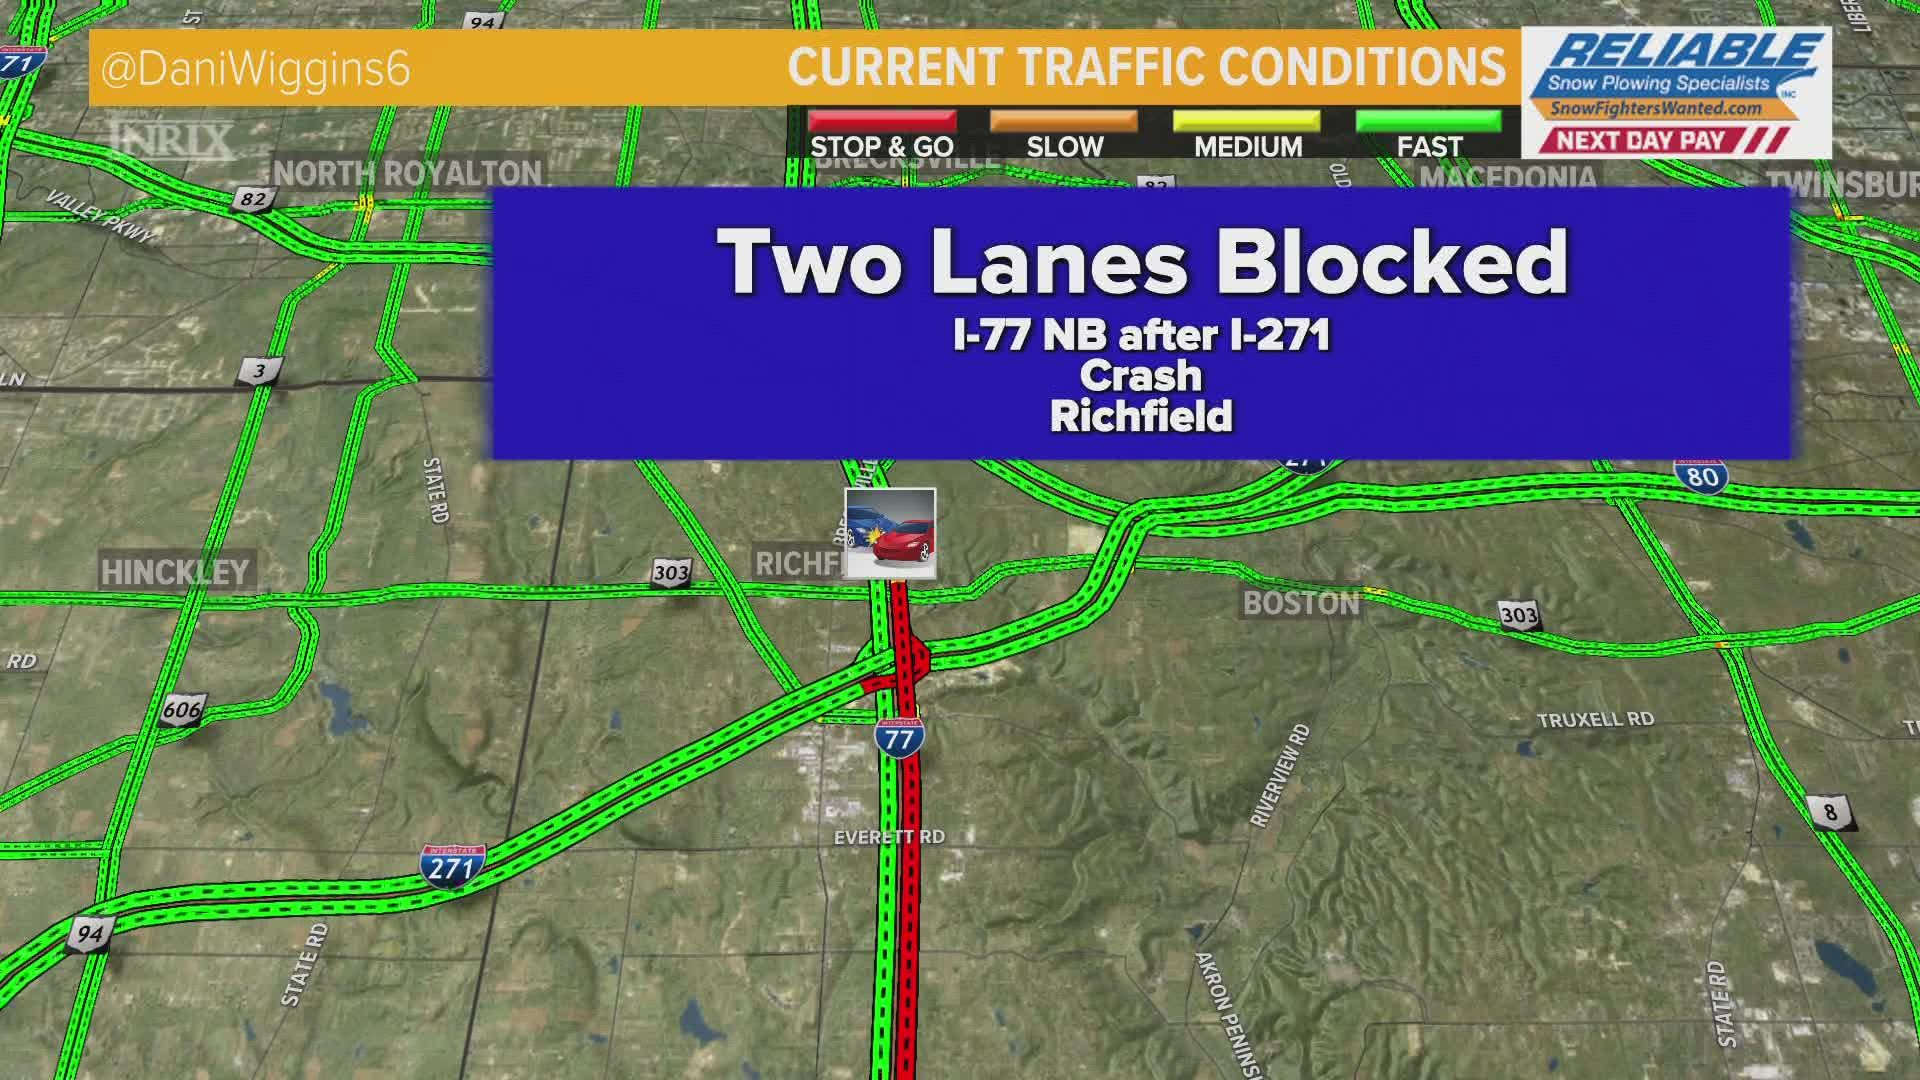 A crash on I-77 North near I-271 in Richfield is causing major traffic delays in Summit County.